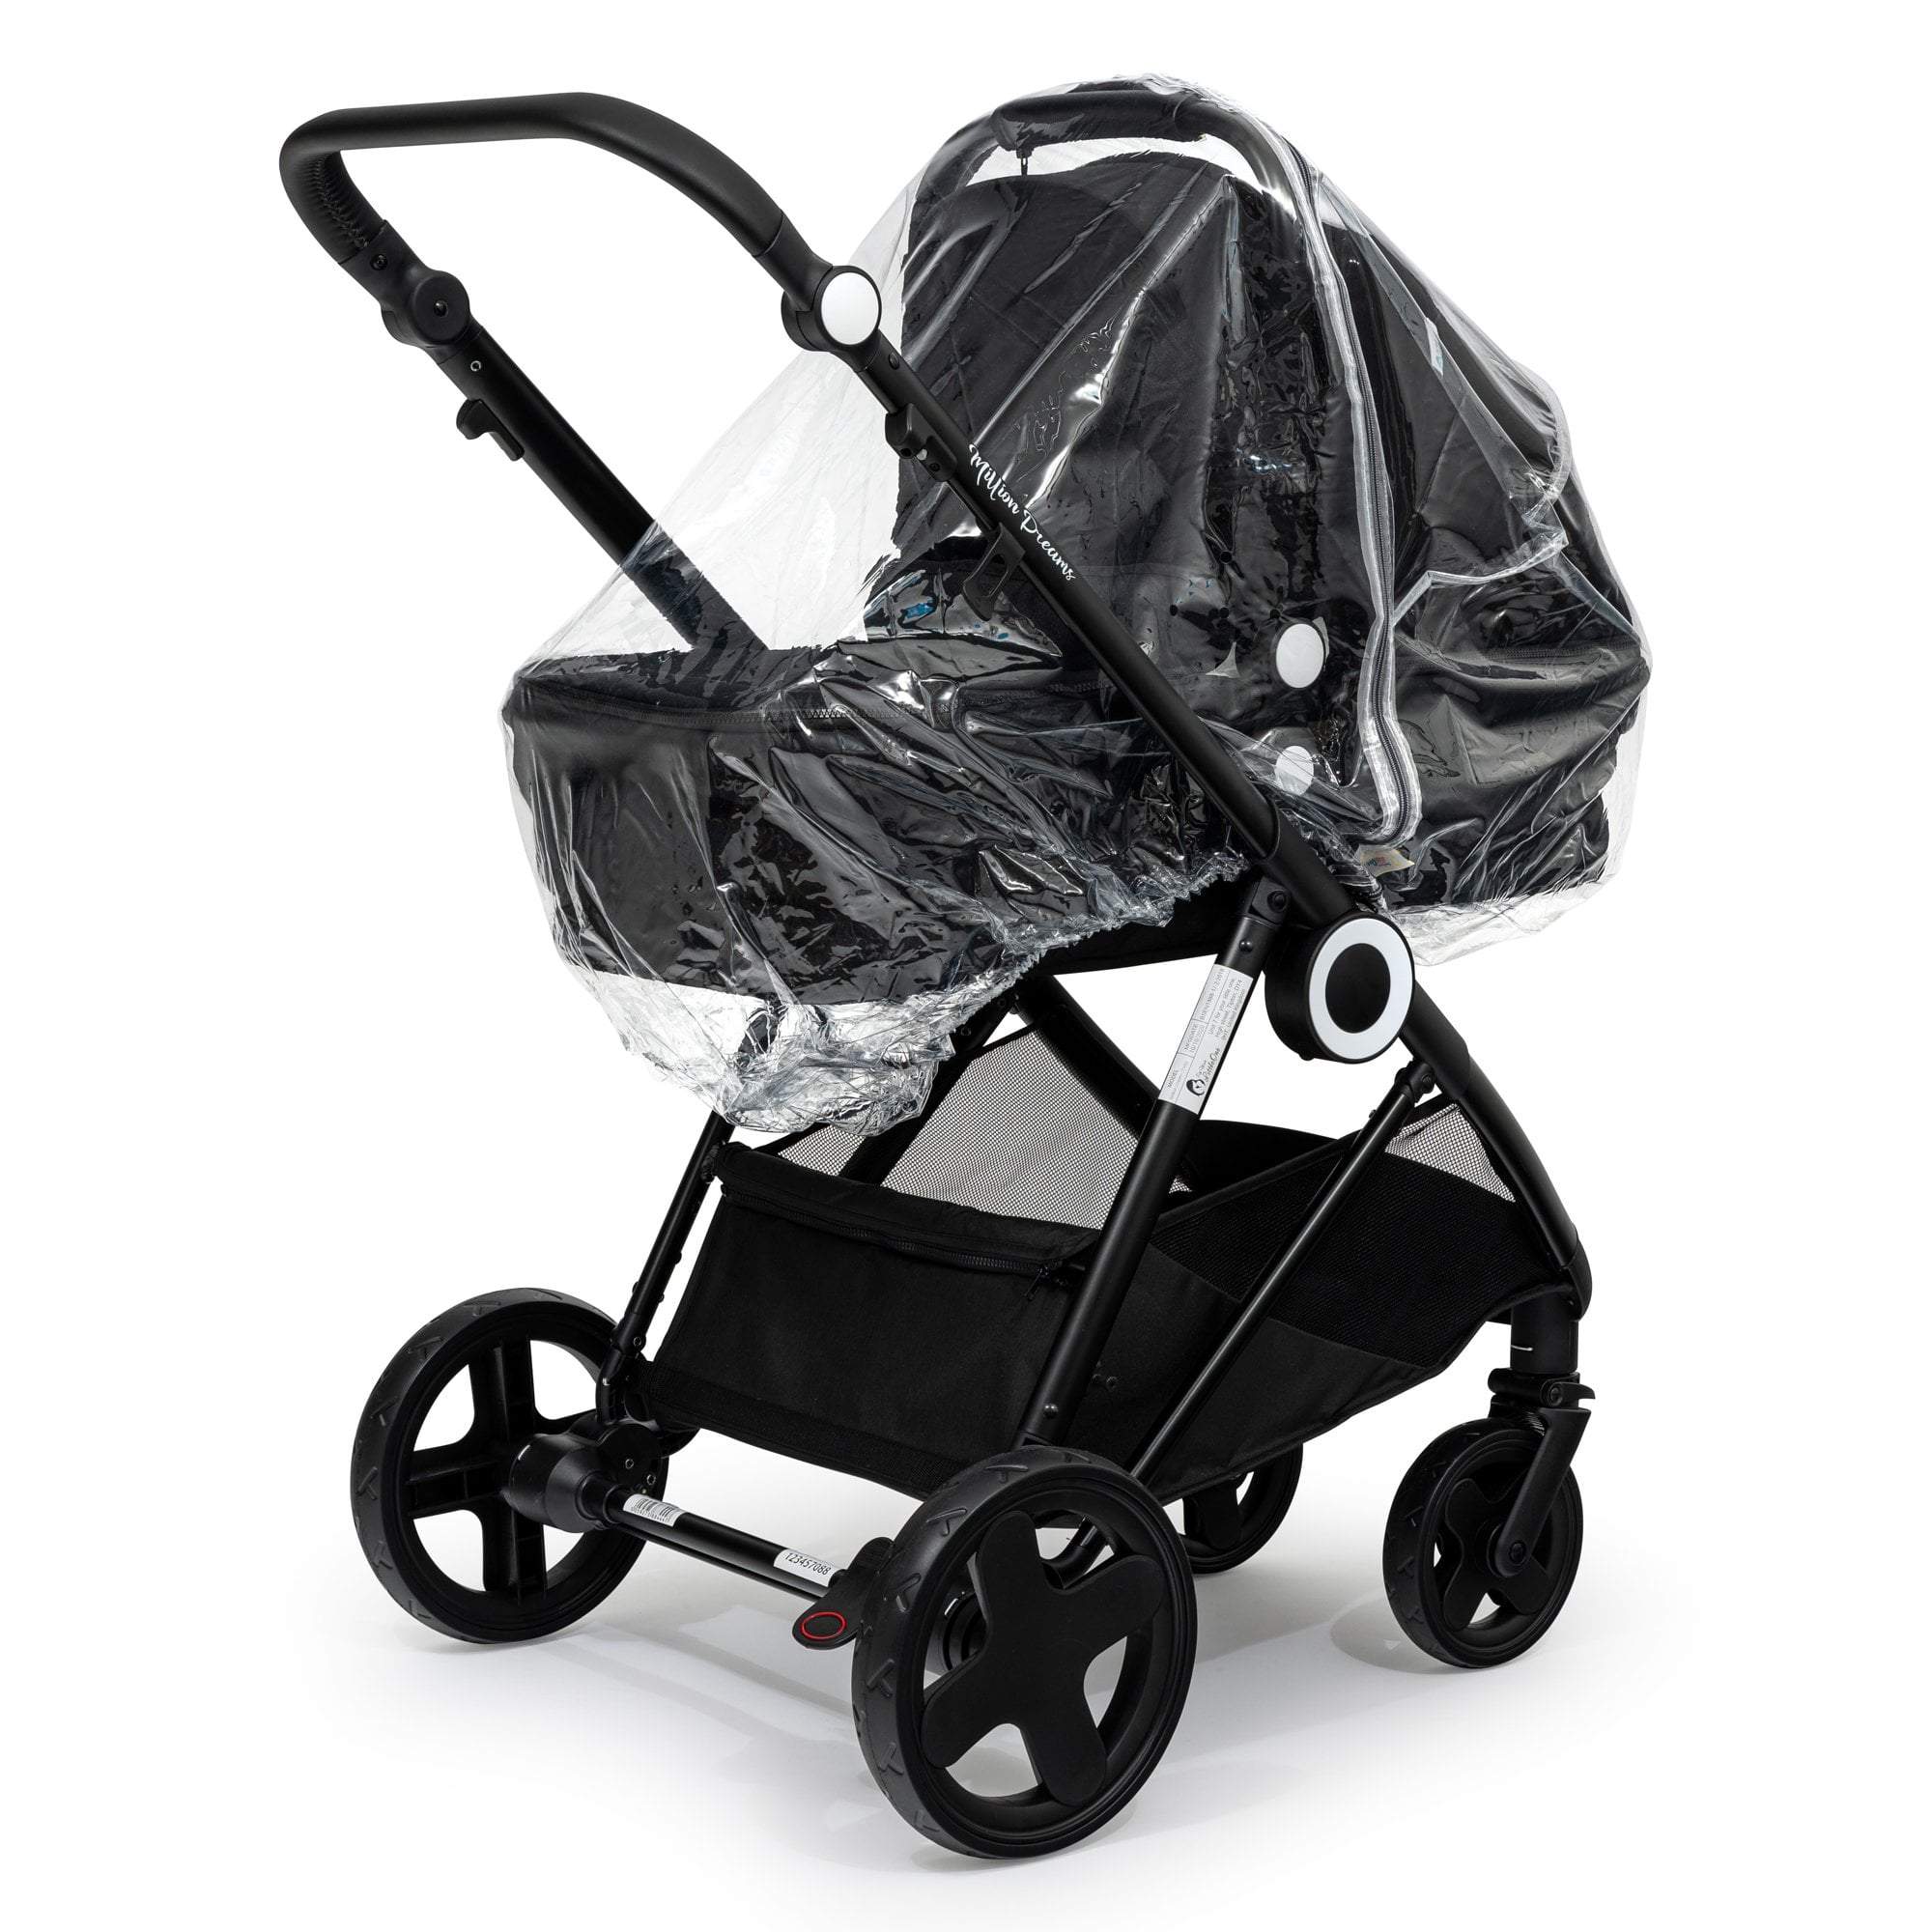 Carrycot Raincover Compatible With Britax - Fits All Models - For Your Little One